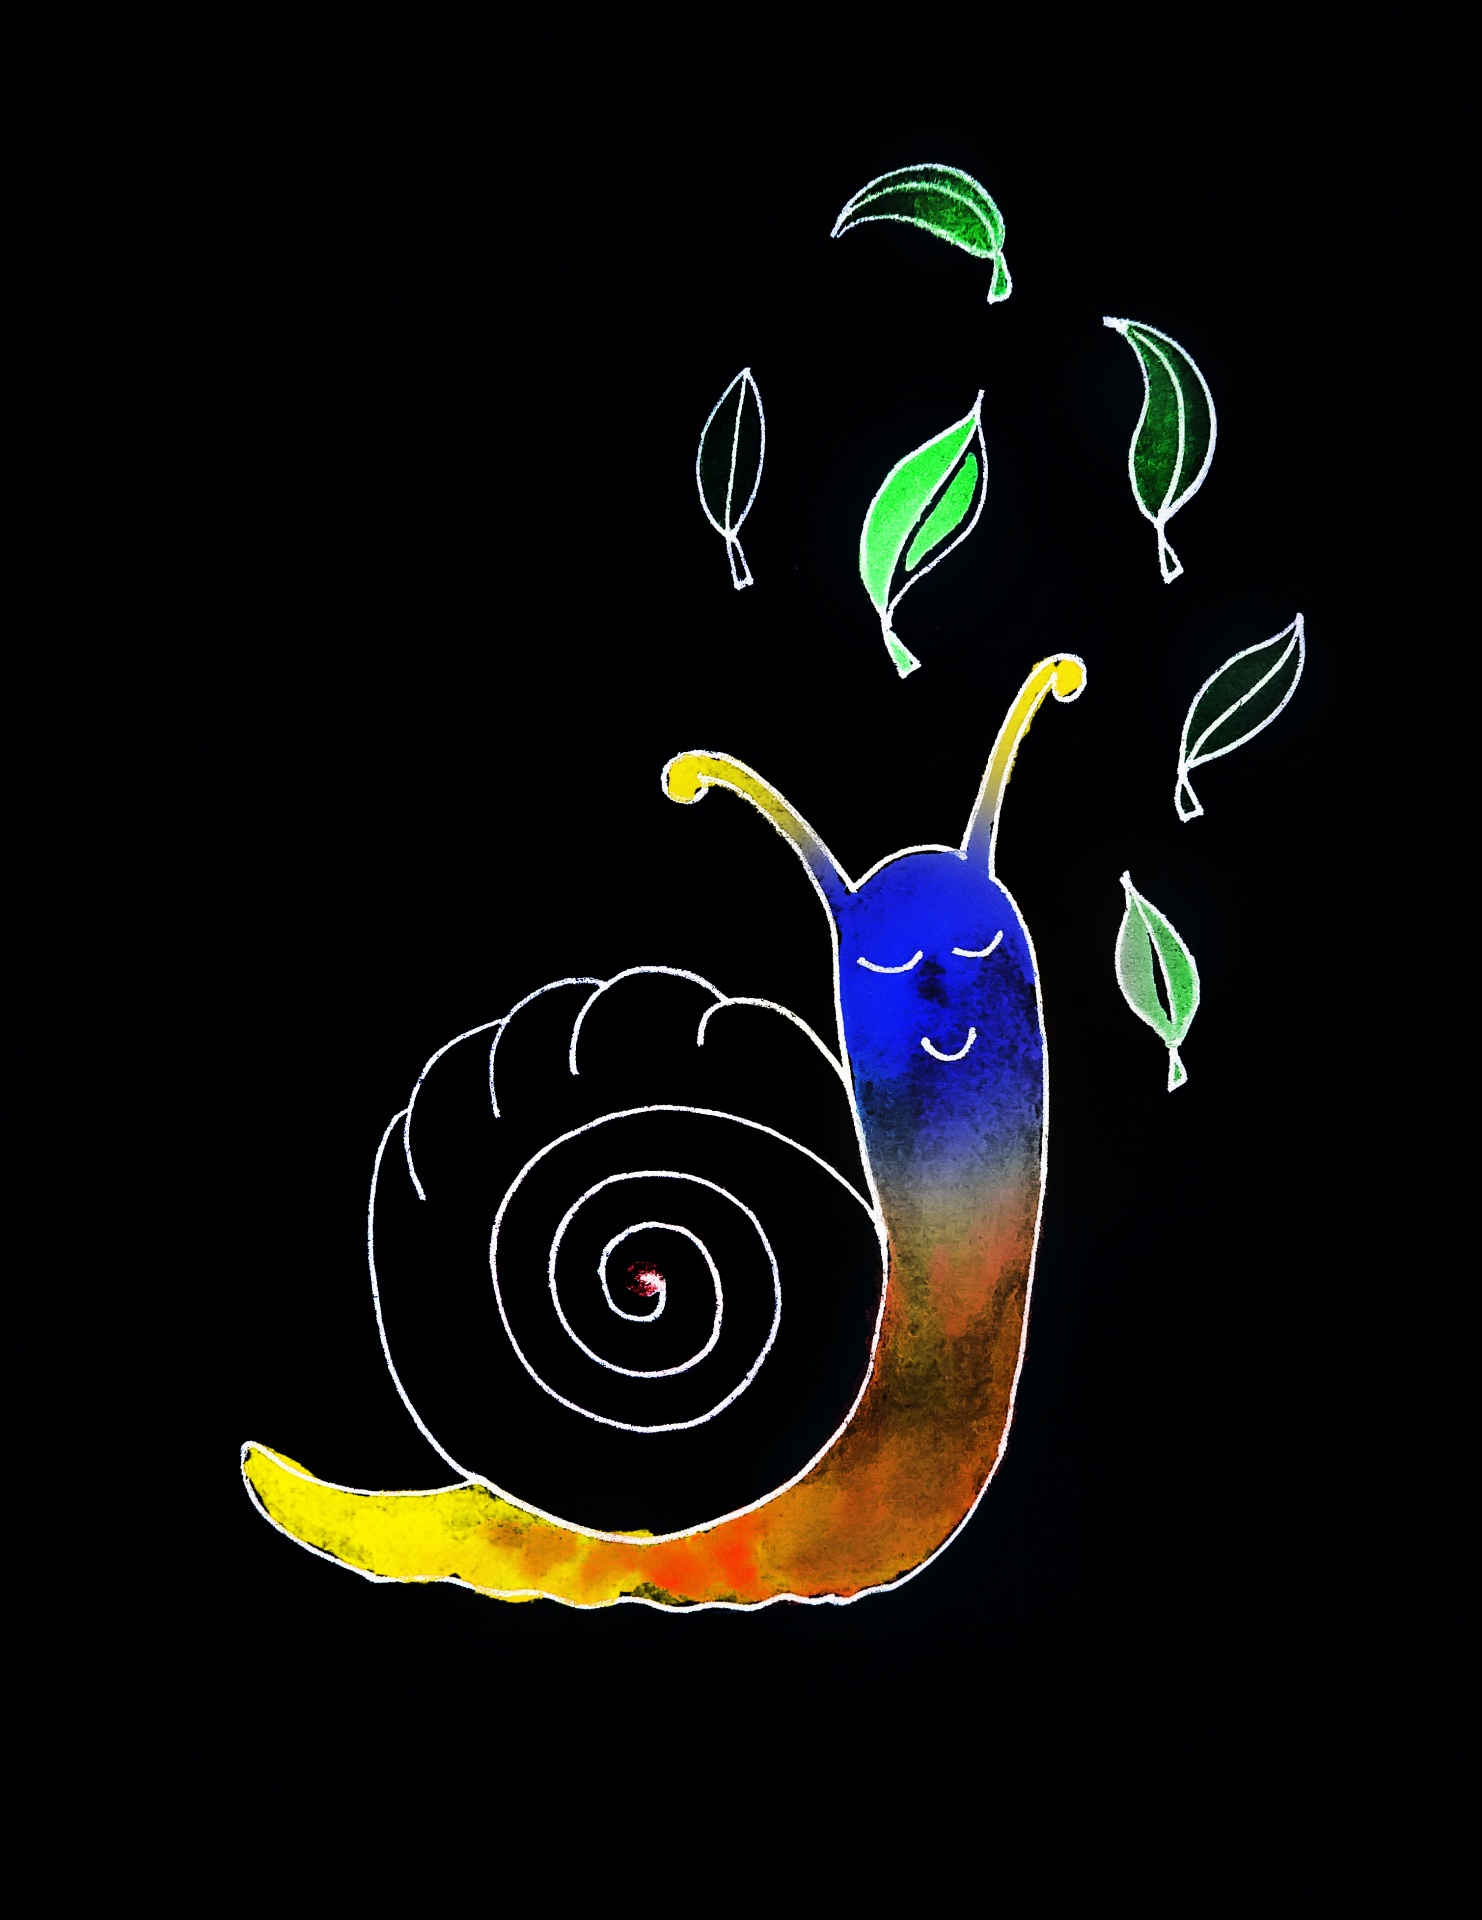 Snail, Smile, Cute, Leaves, Clam